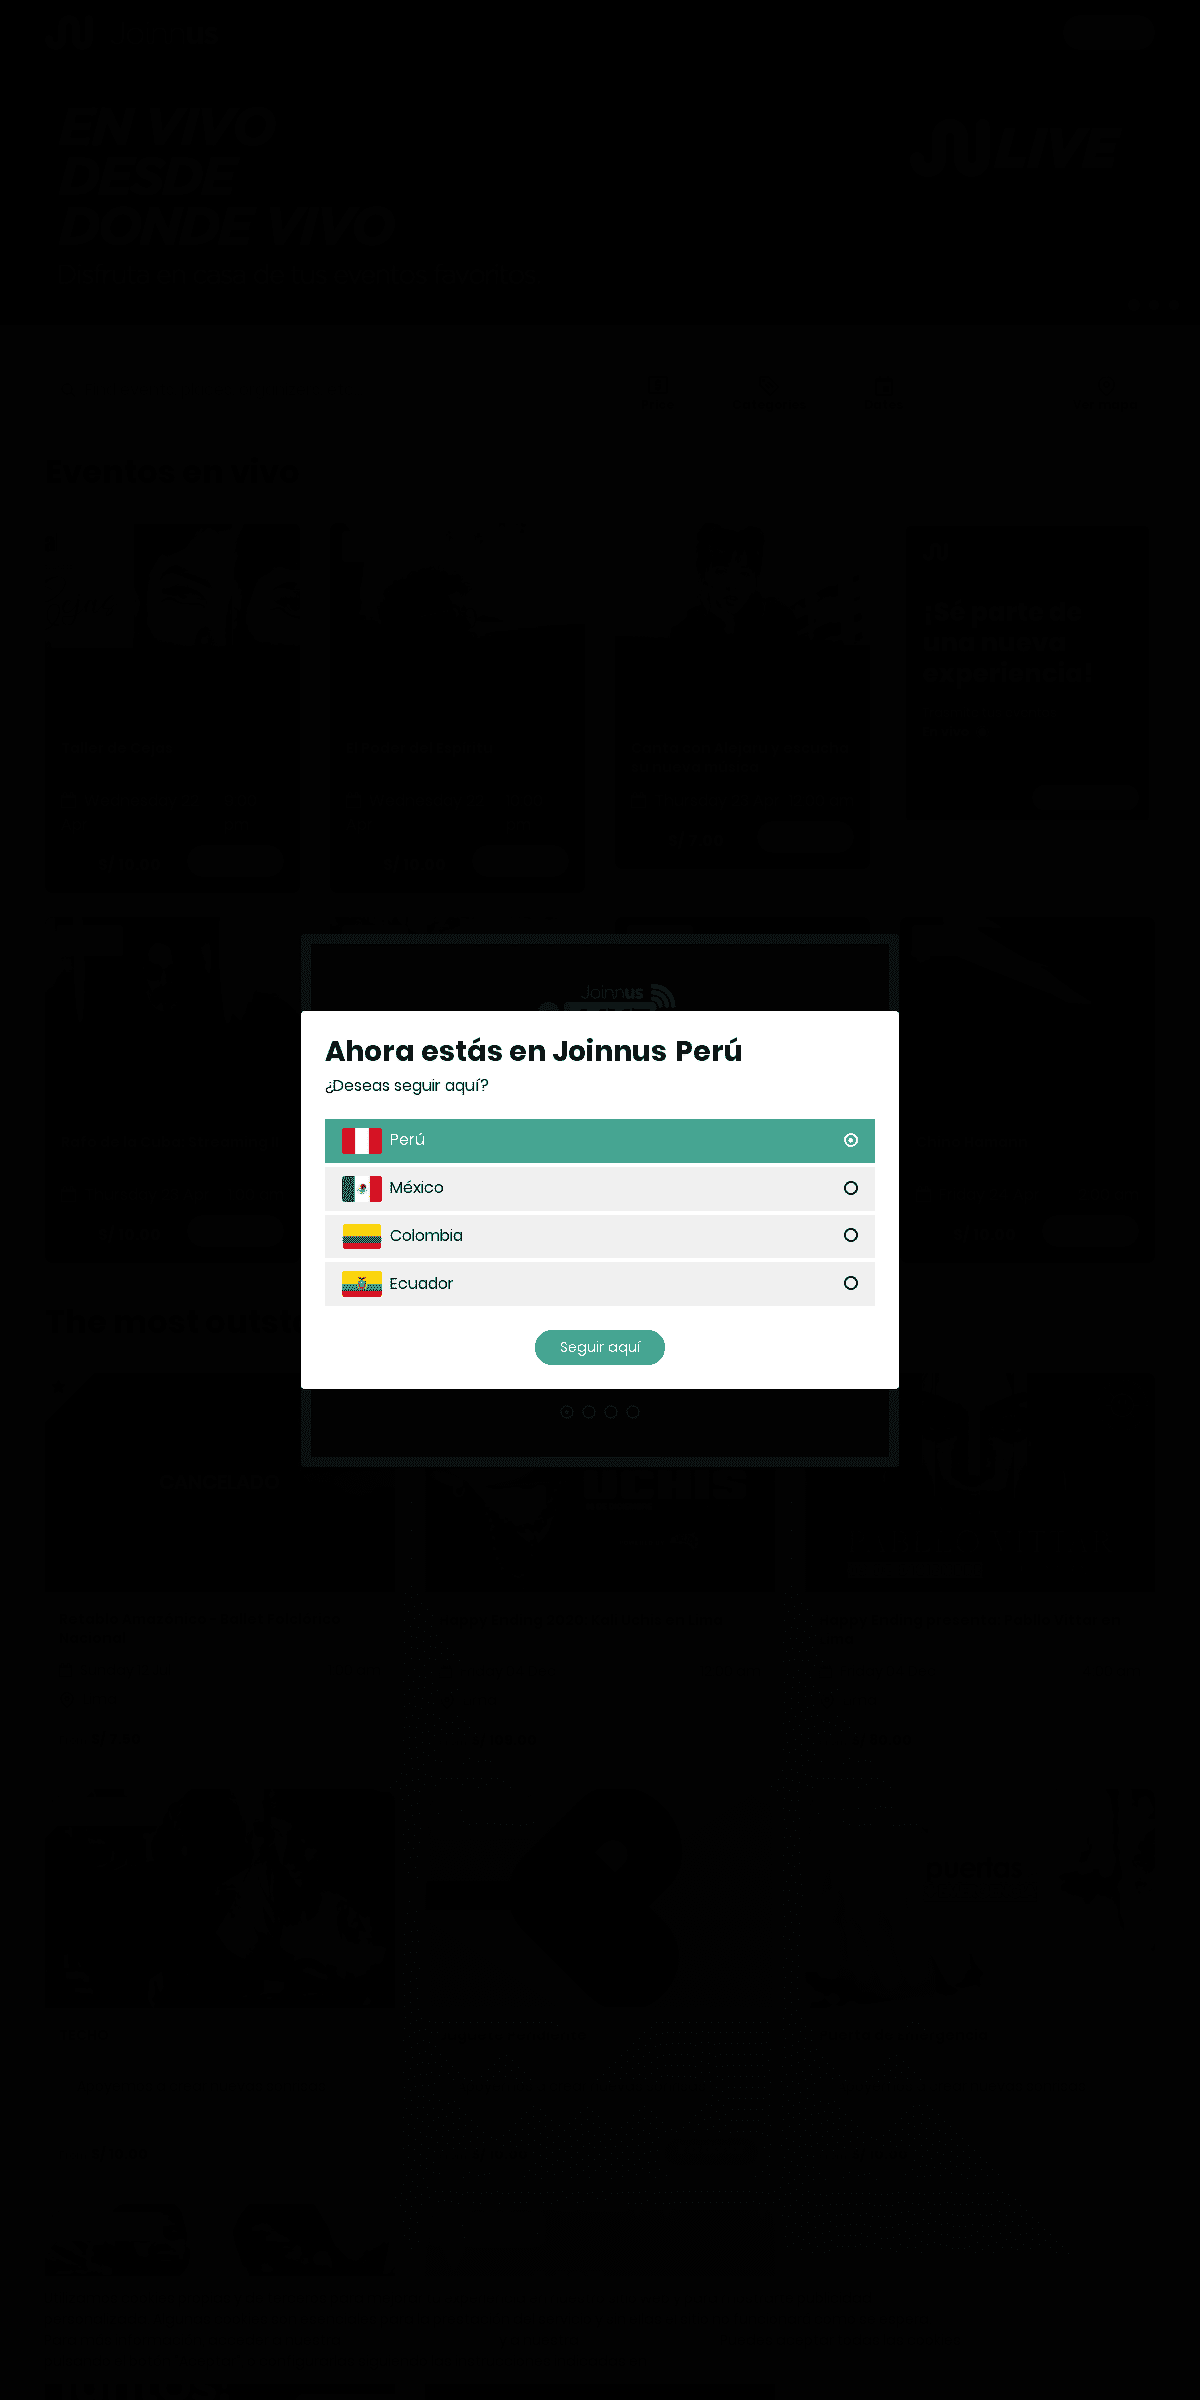 A complete backup of joinnus.com